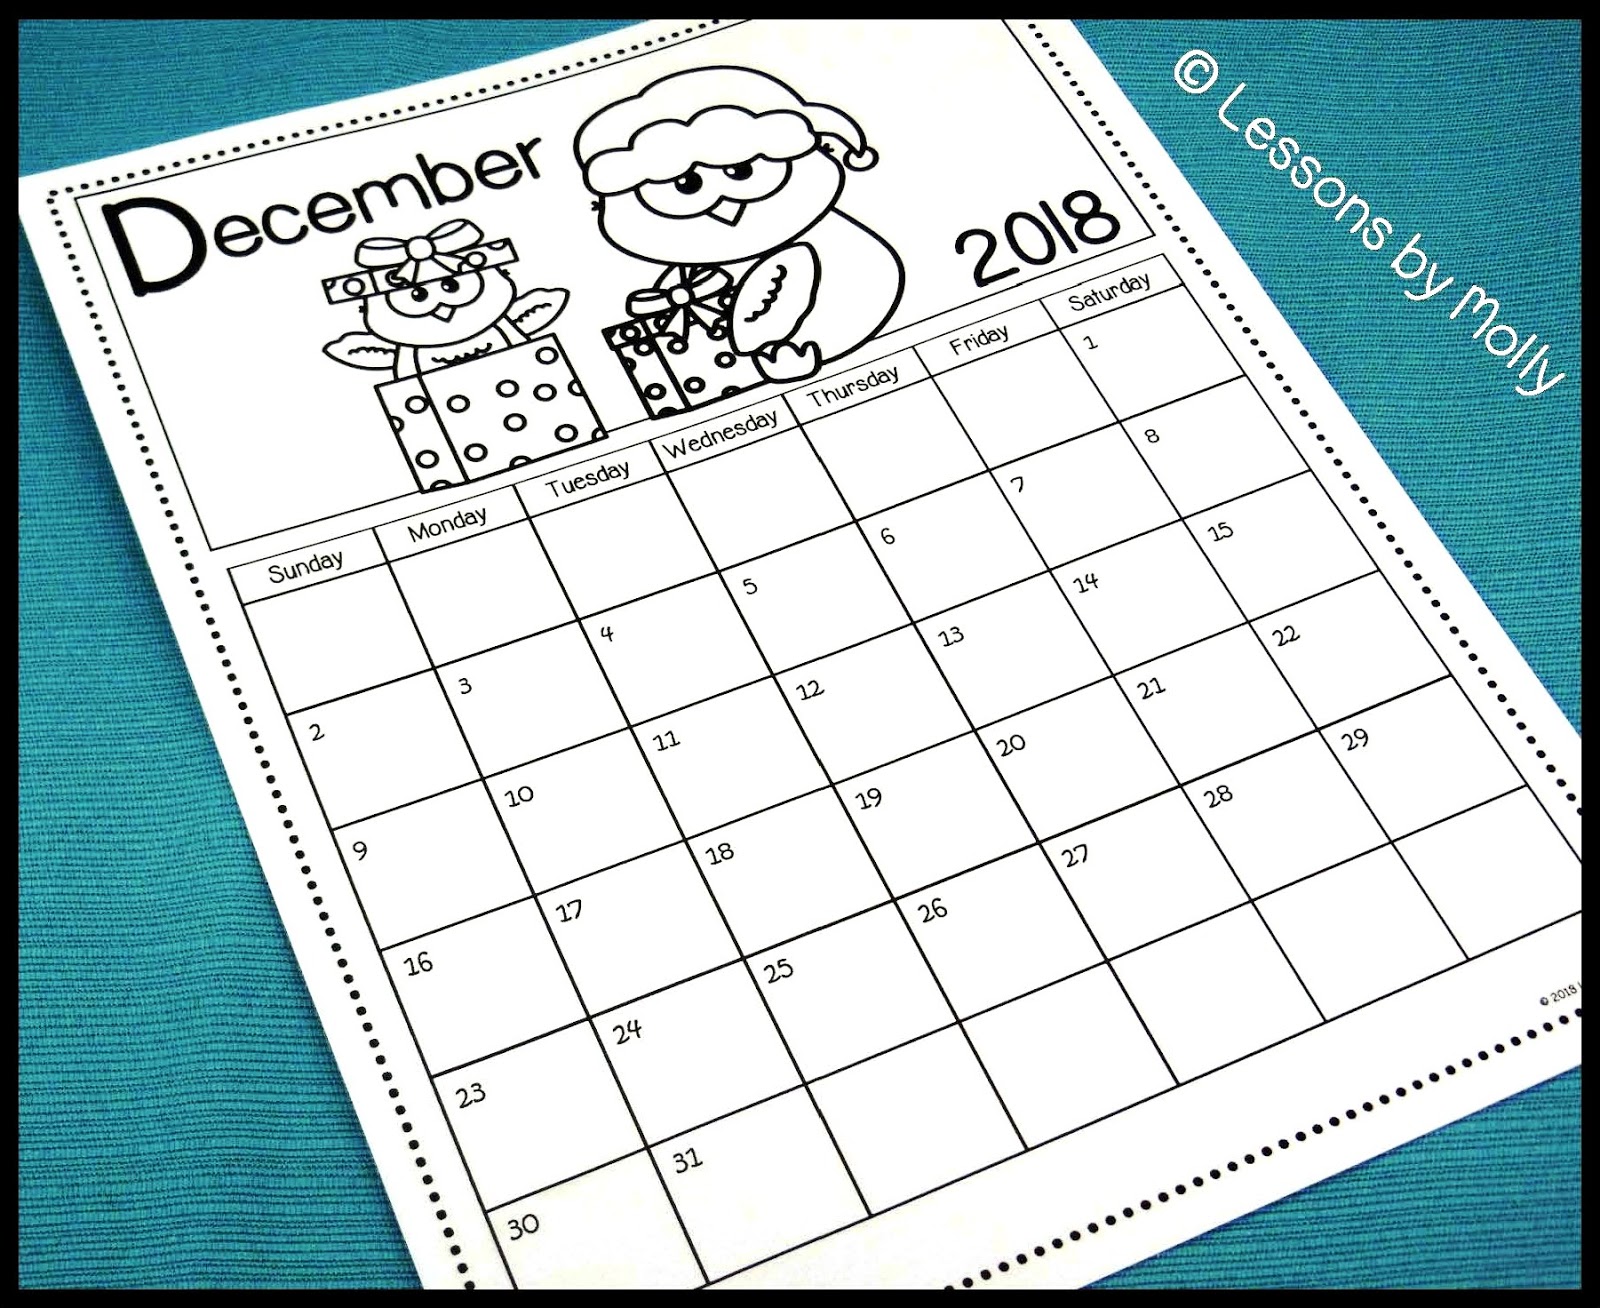 This free 2018 19 monthly calendar includes a printable calendar page for every month of